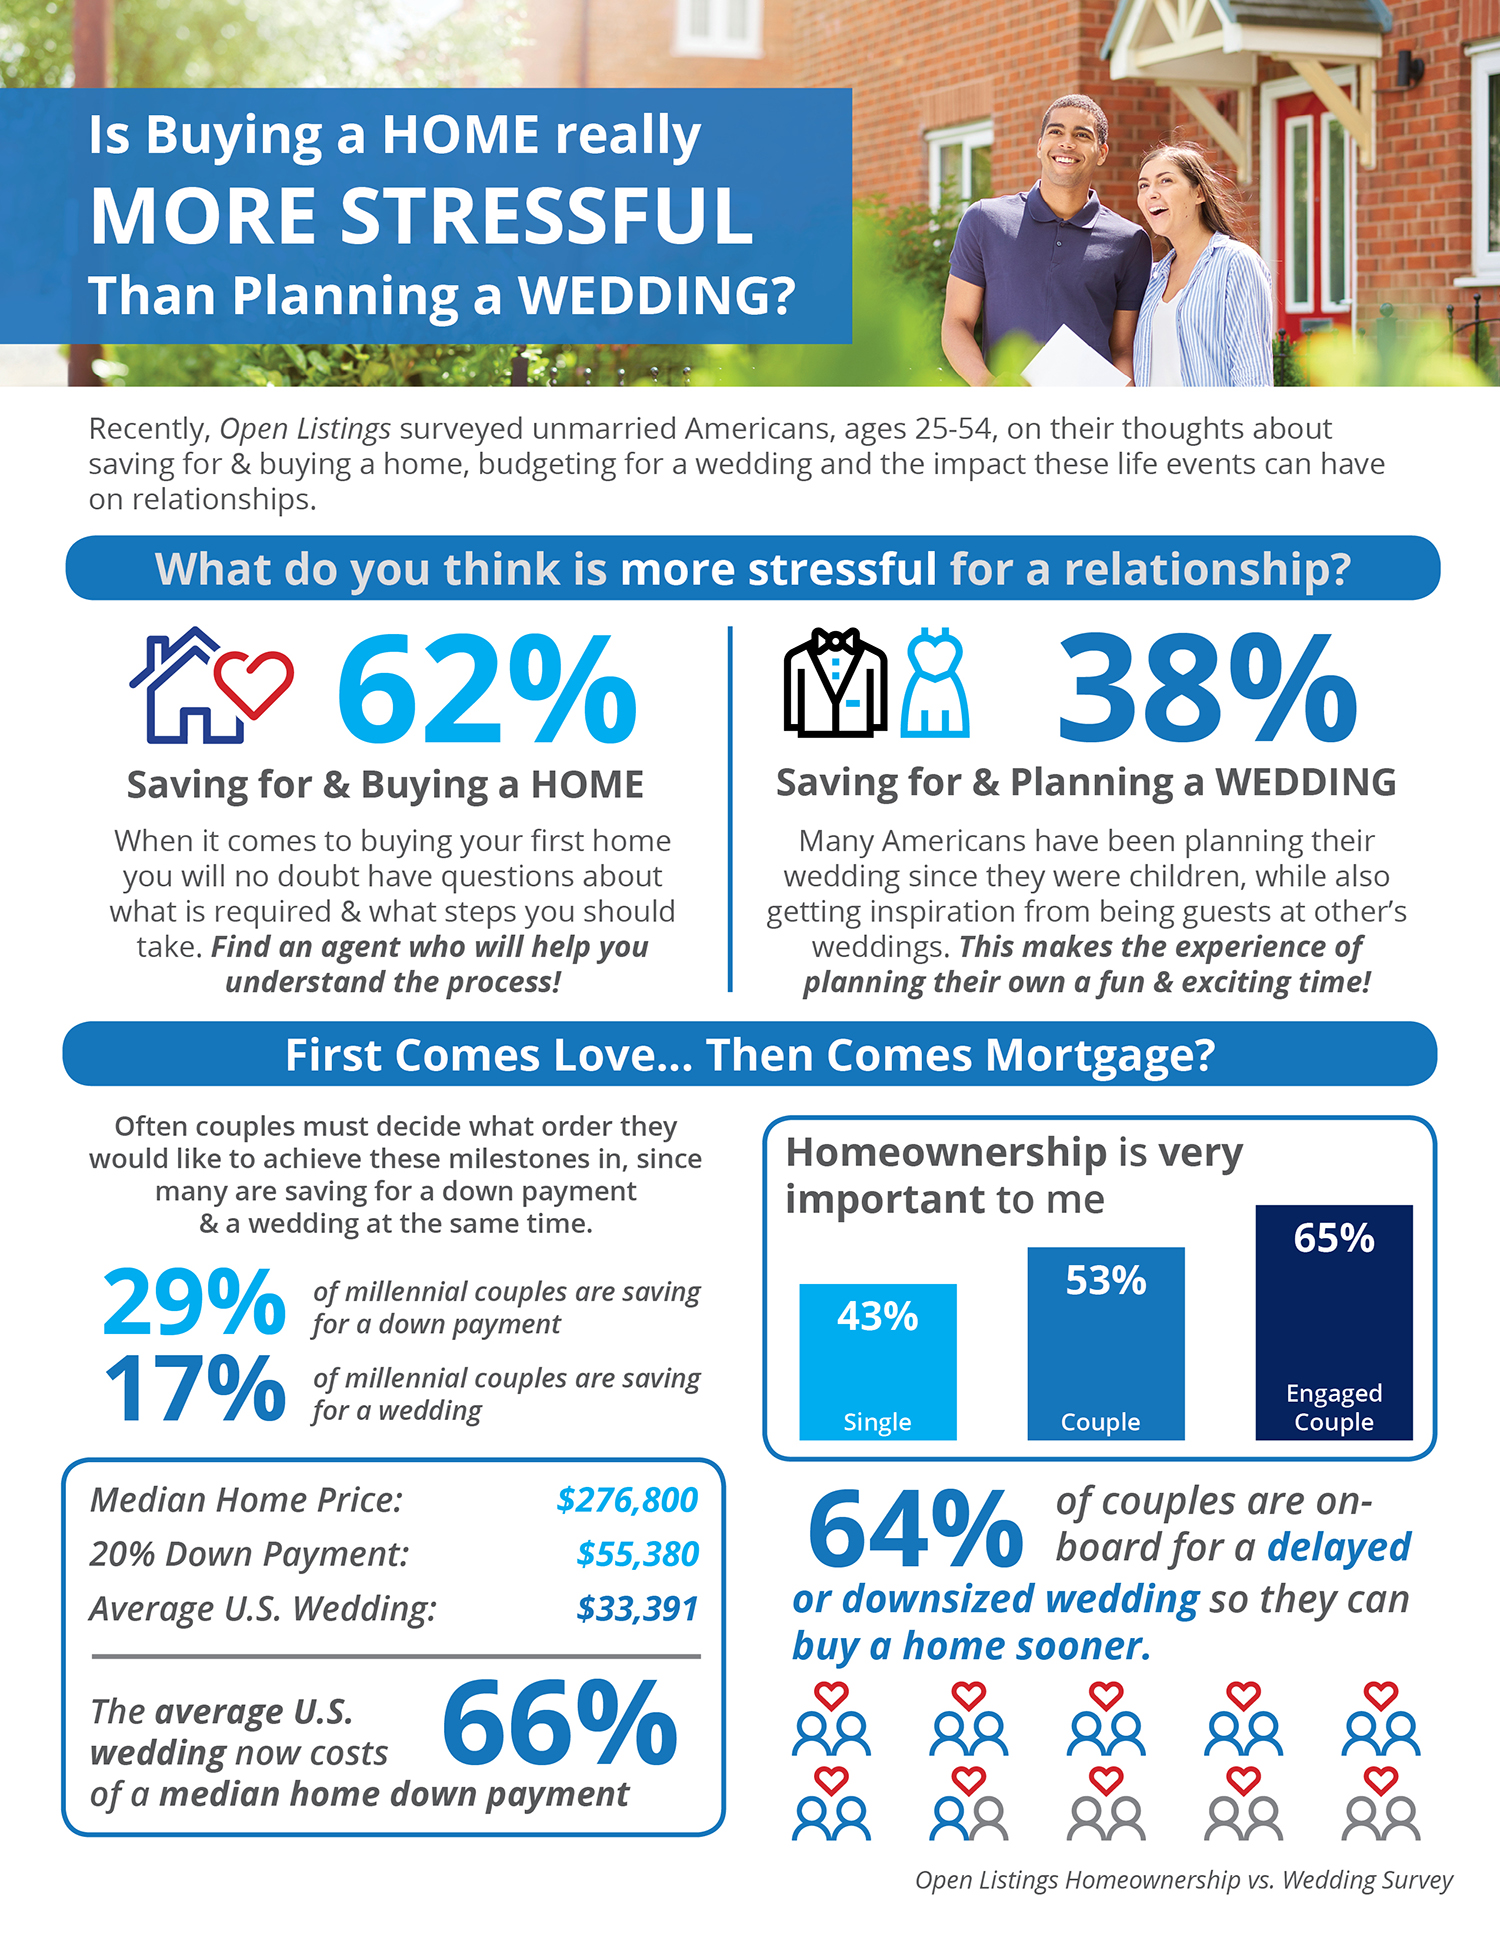 Is Buying a Home Really More Stressful Than Planning a Wedding? [INFOGRAPHIC] | Simplifying The Market